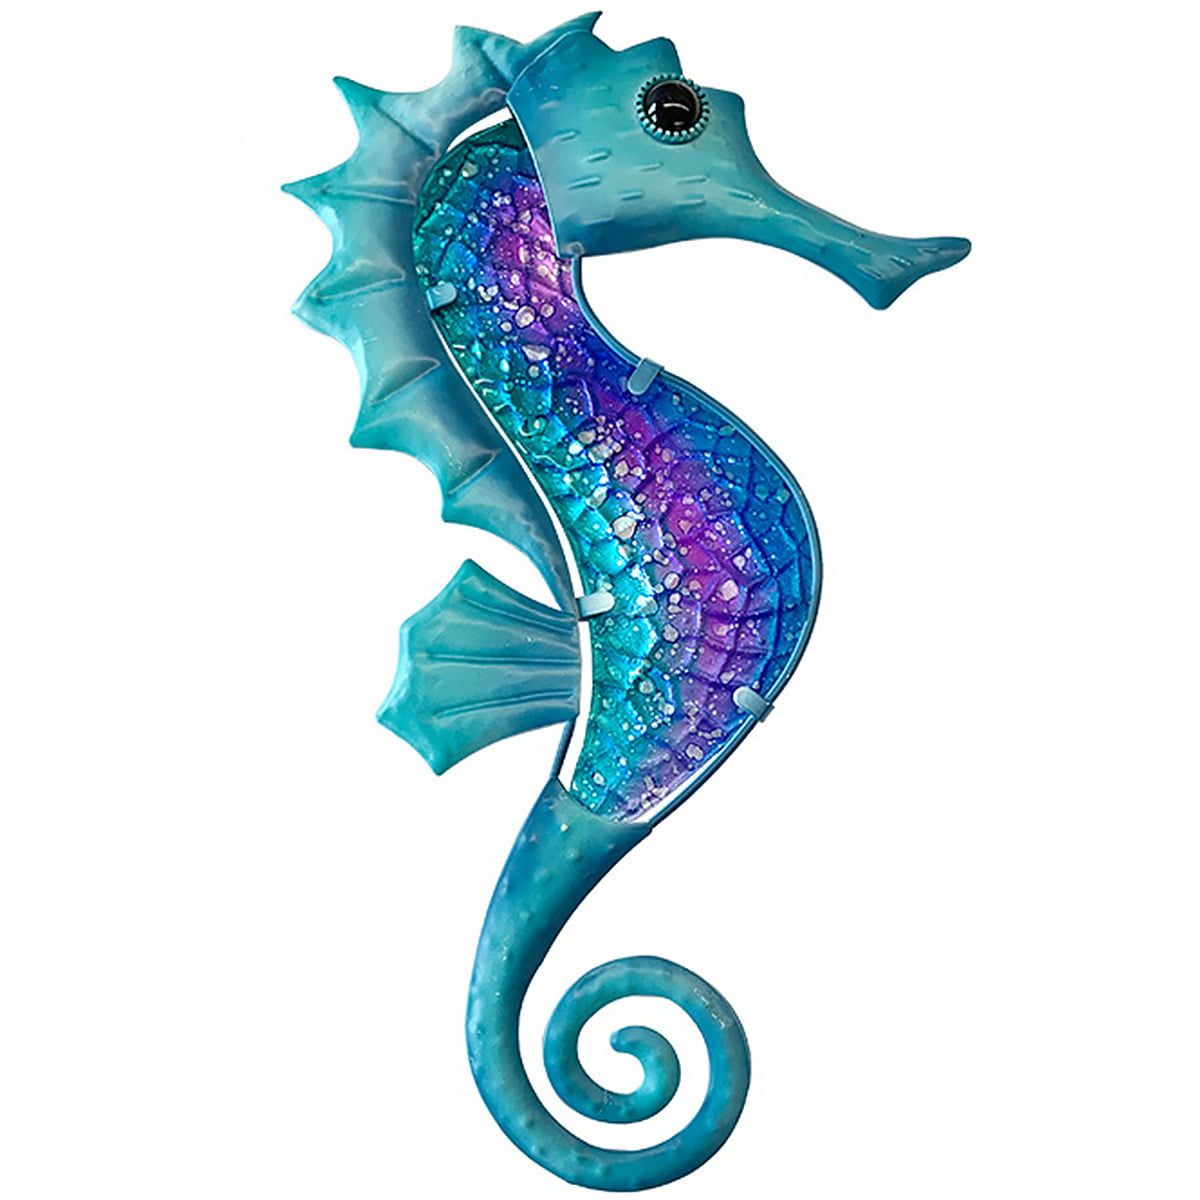 Pcapzz Metal Seahorse Wall Decor,metal Seahorse Owl Wall Art,metal And  Glass Art Sculpture Hanging Decor For Home Patio Porch Garden Bedroom –  Walmart Regarding Best And Newest Seahorse Wall Art (View 18 of 20)